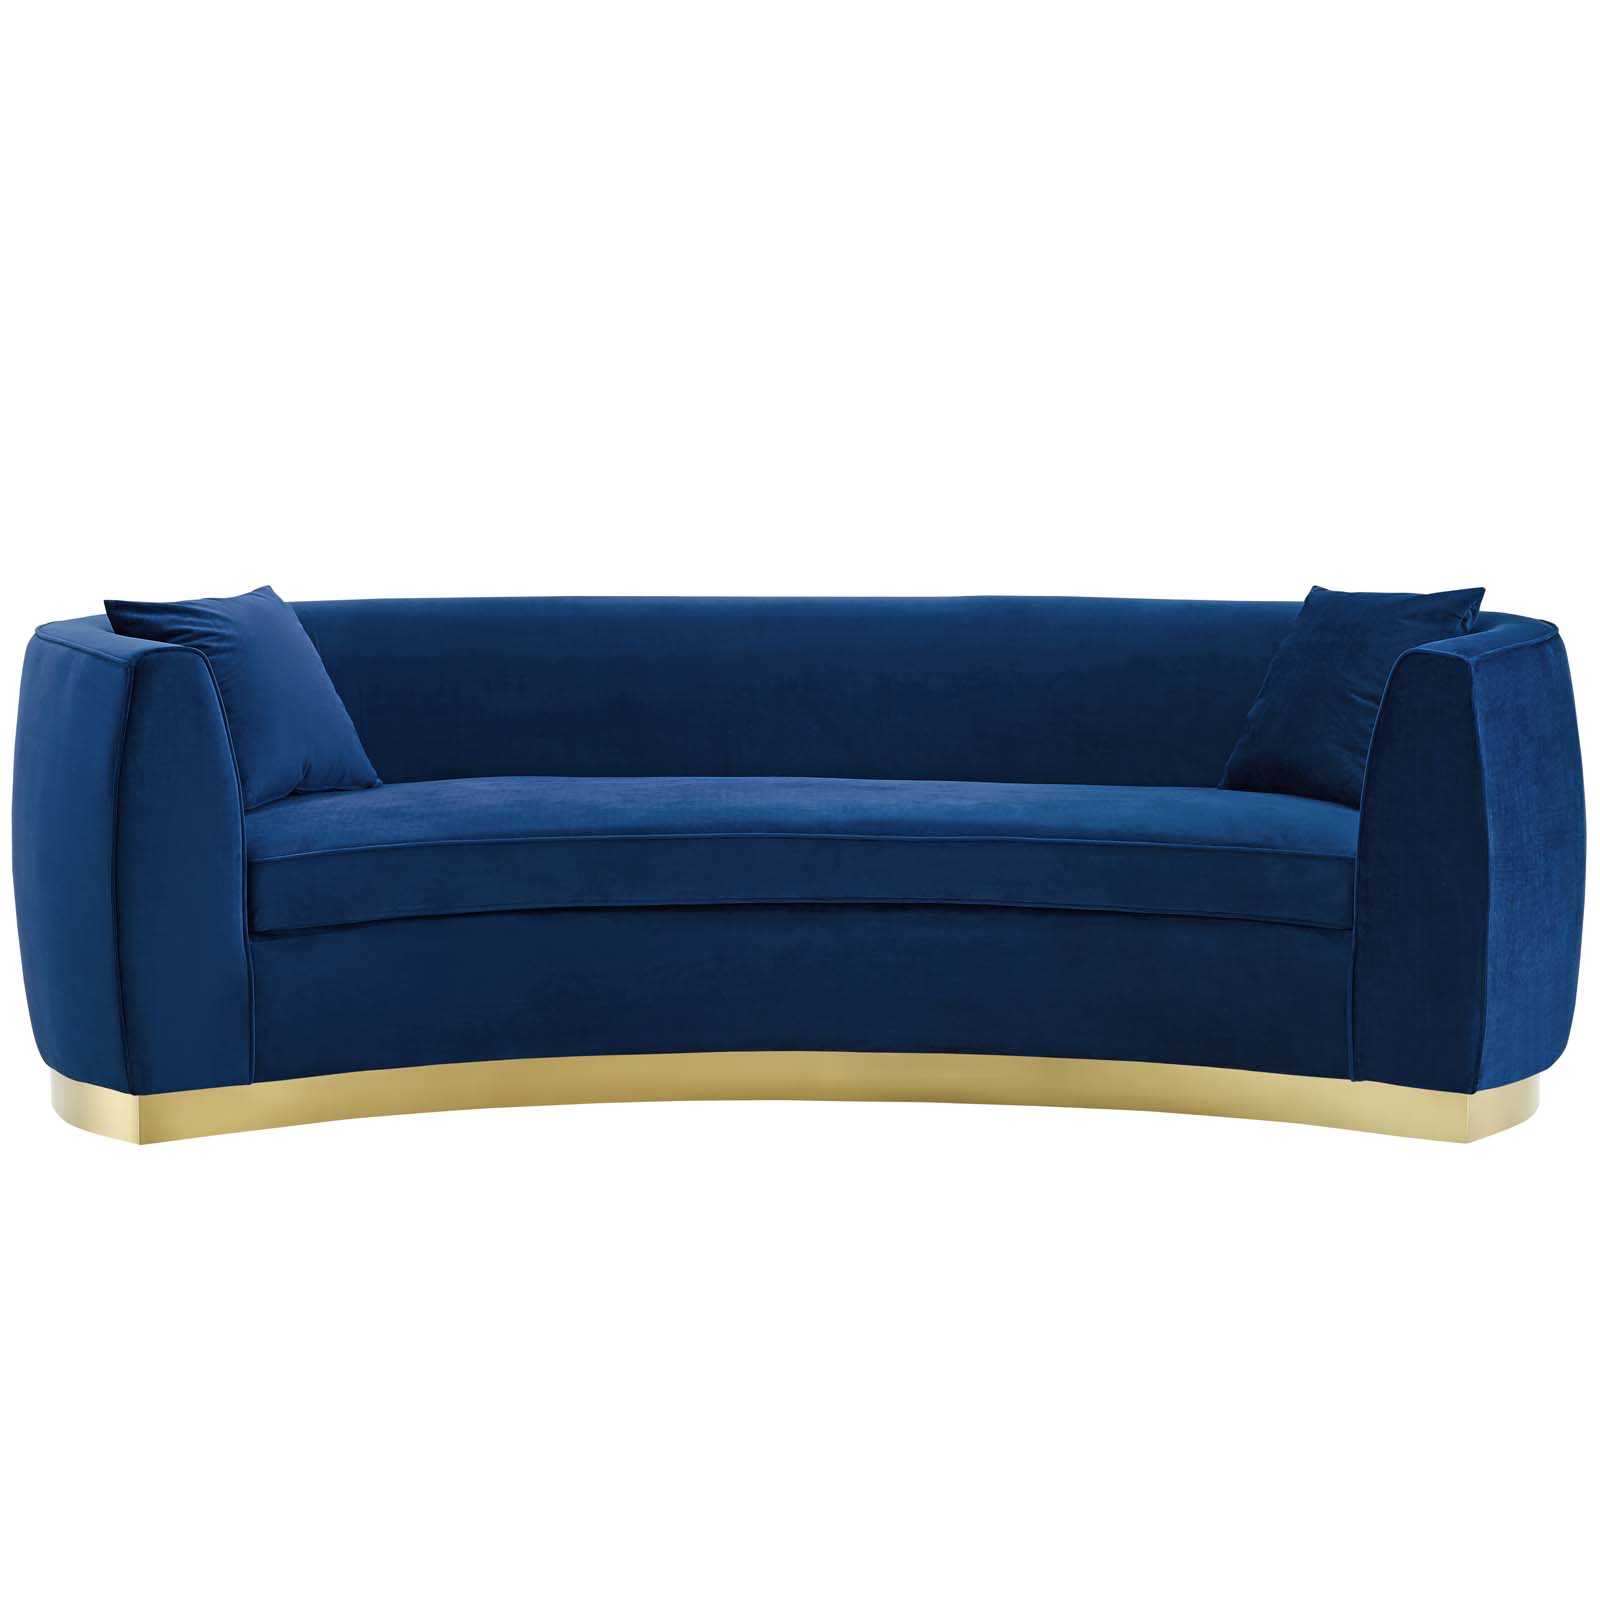 Modway Resolute Curved Performance Velvet Stainless Steel Sofa in Navy - image 5 of 6